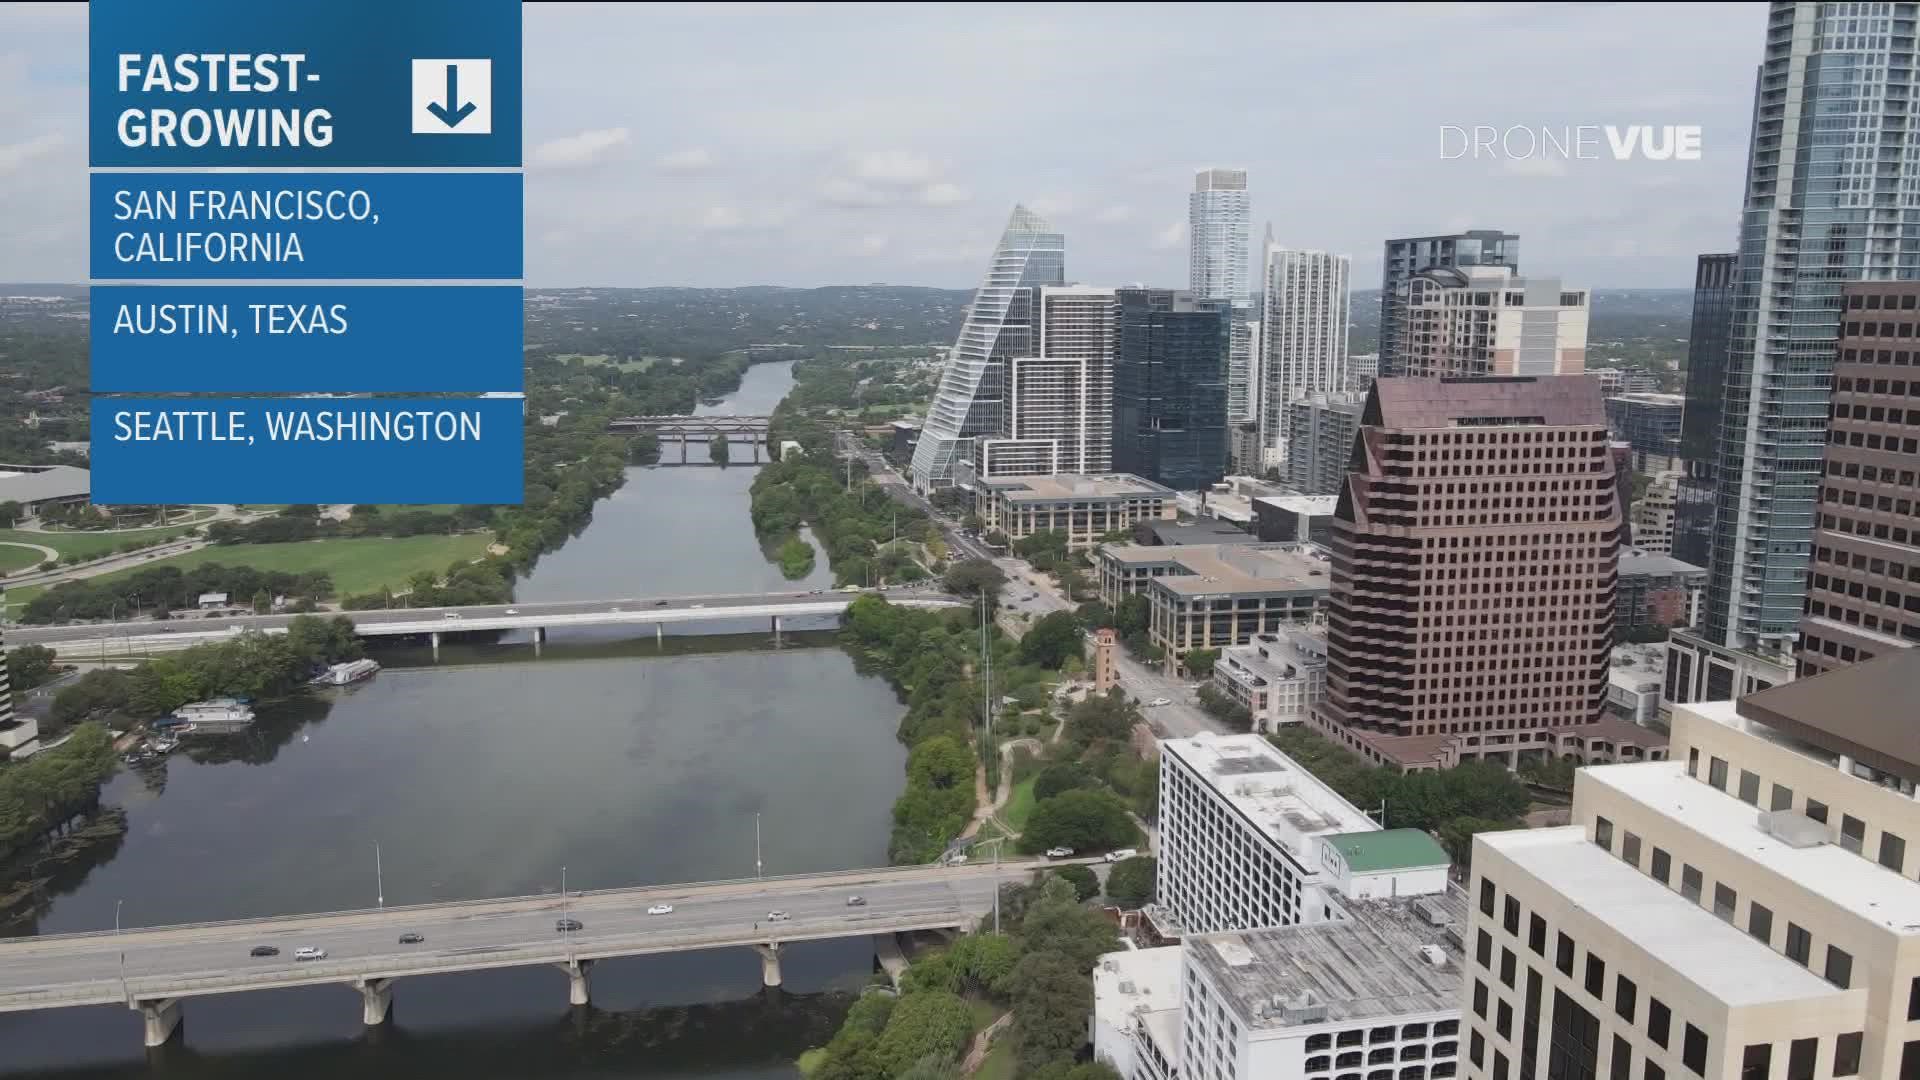 A new report ranks Austin the second fastest-growing city in the U.S.